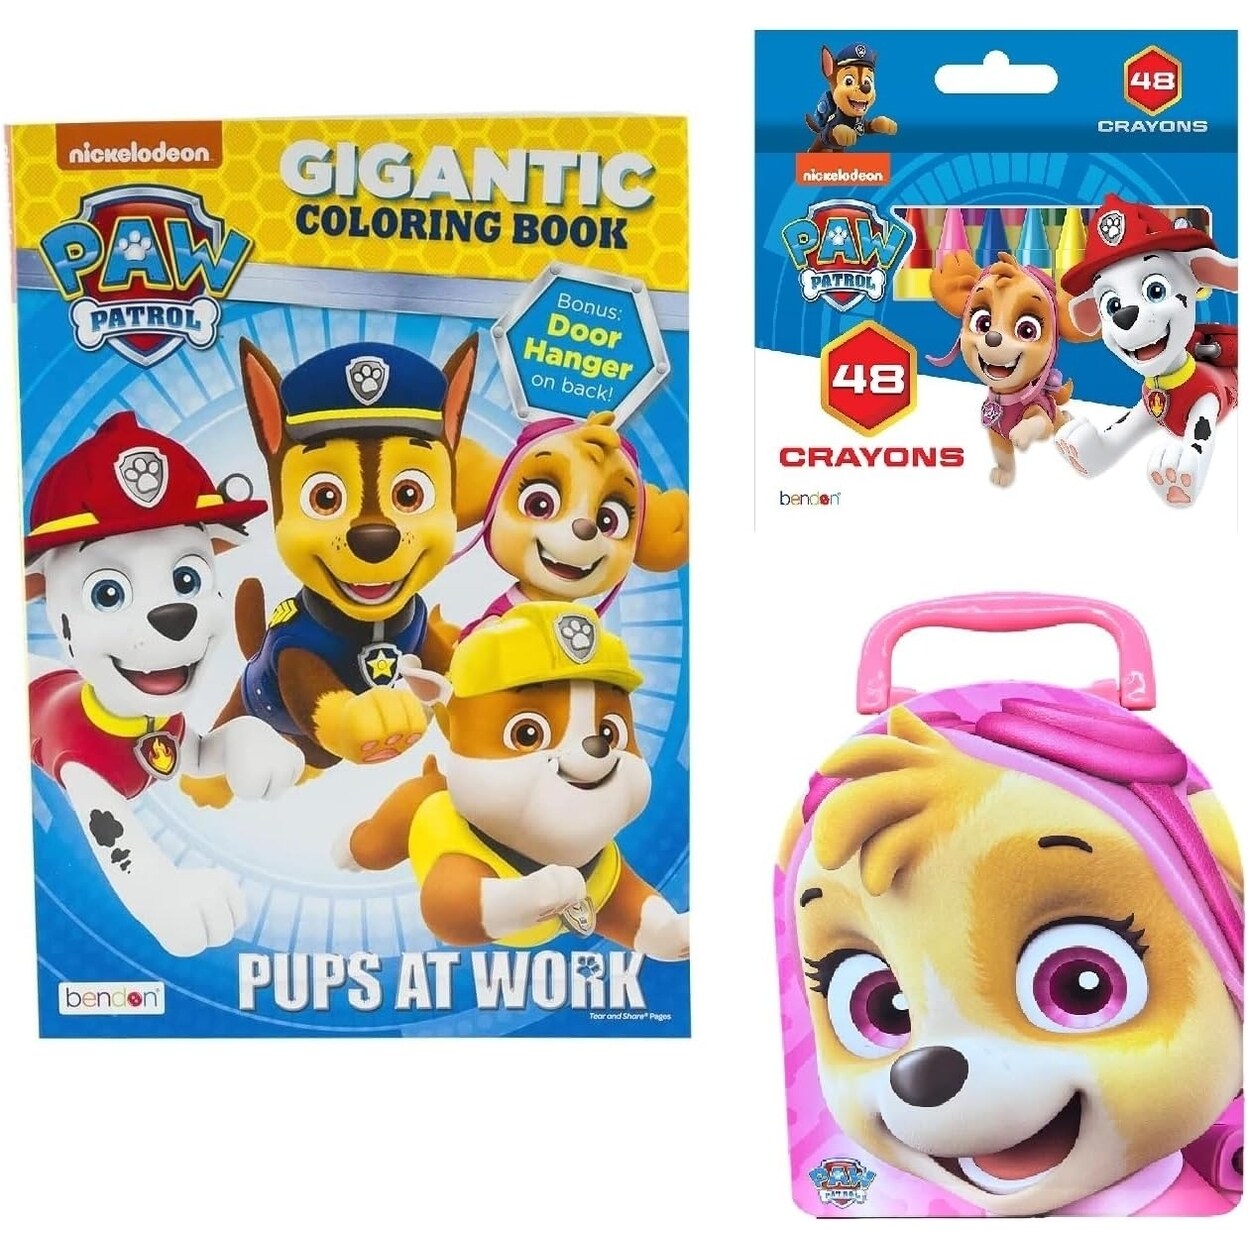 Bendon Publishing Paw Patrol Coloring Book Gift Set for Kids with 192 Coloring Pages 48 Crayons Storage Tin (Skye)